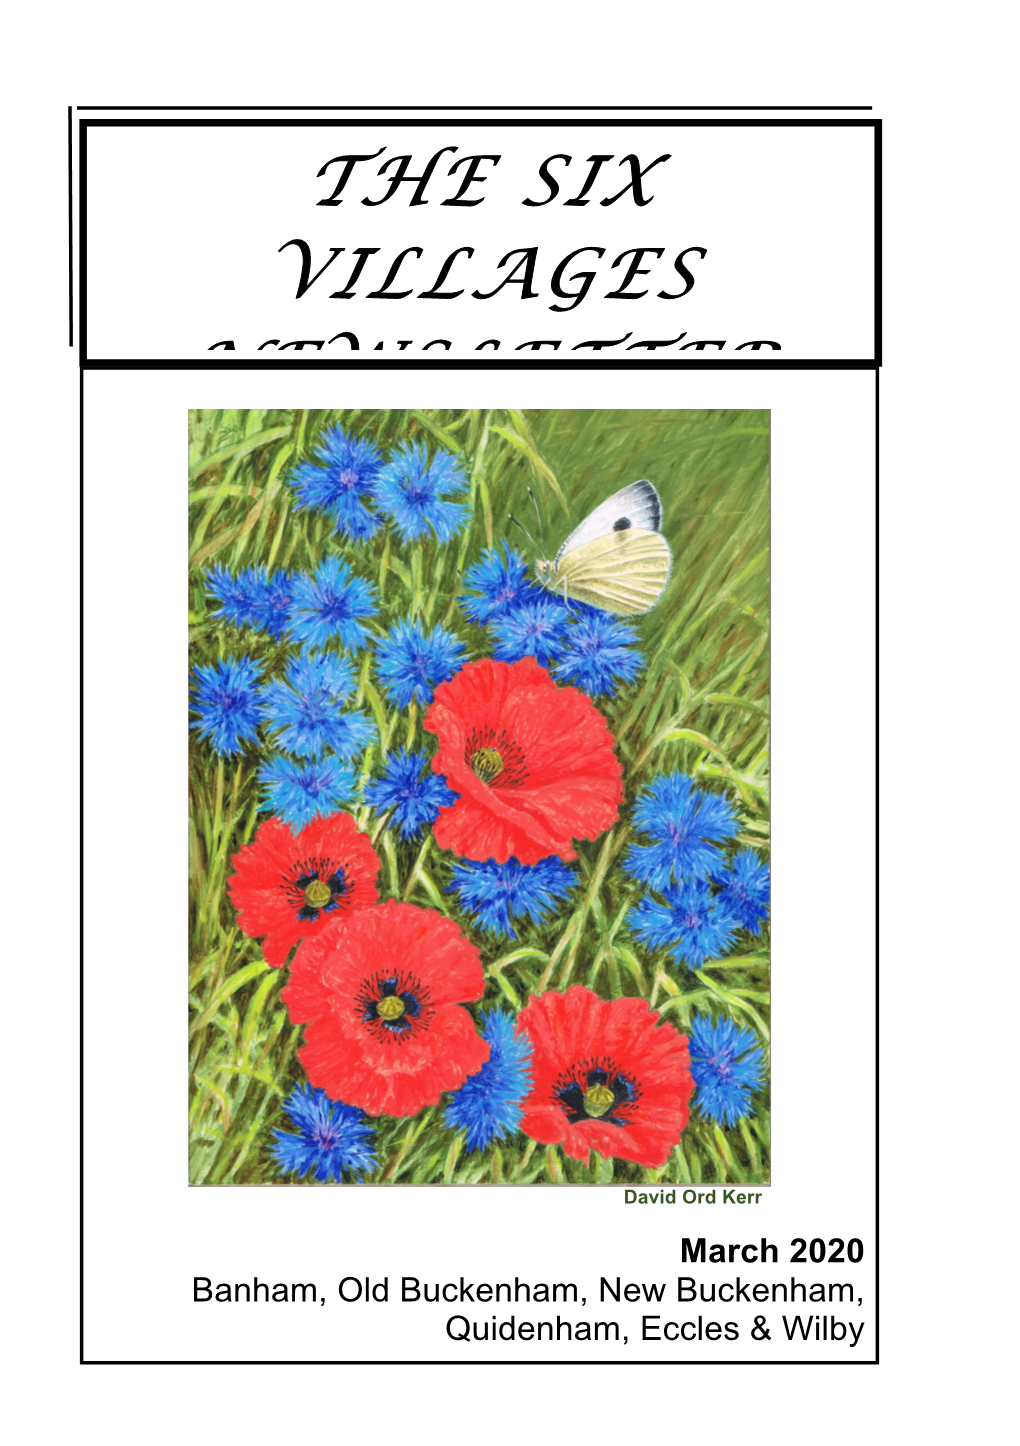 The Six Villages Newsletter Is Online At